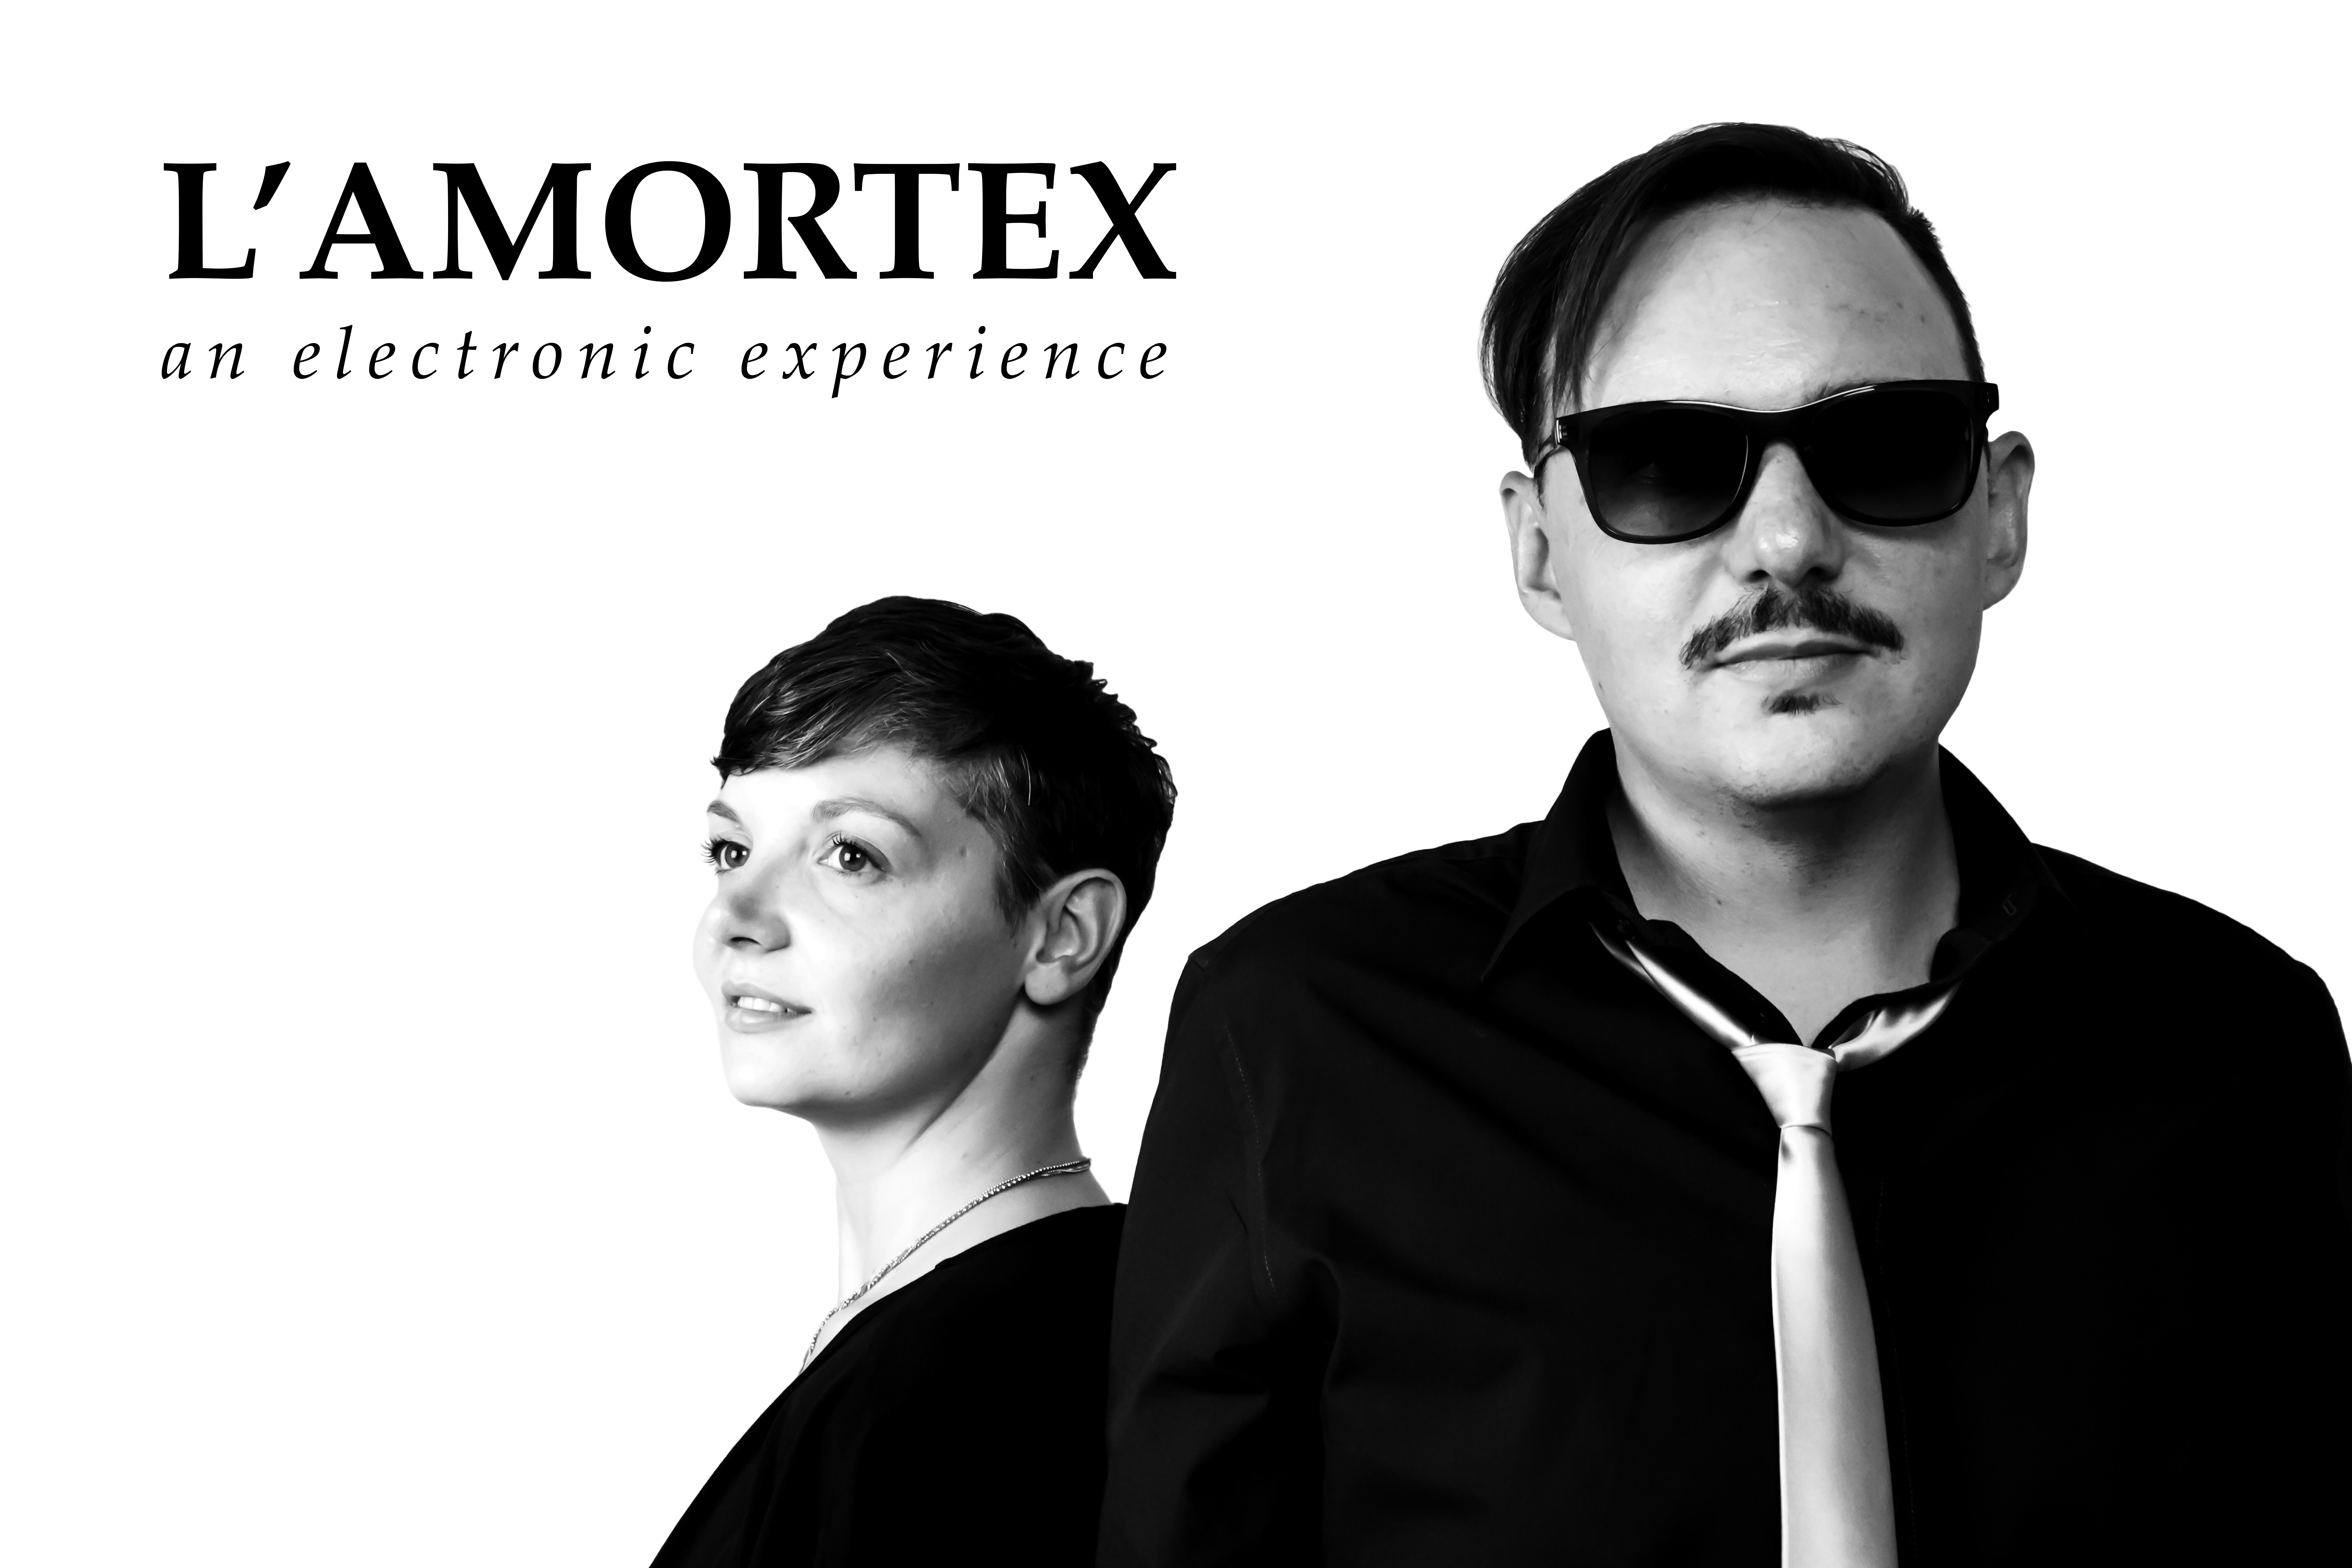 L’Amortex – An electronic experience live